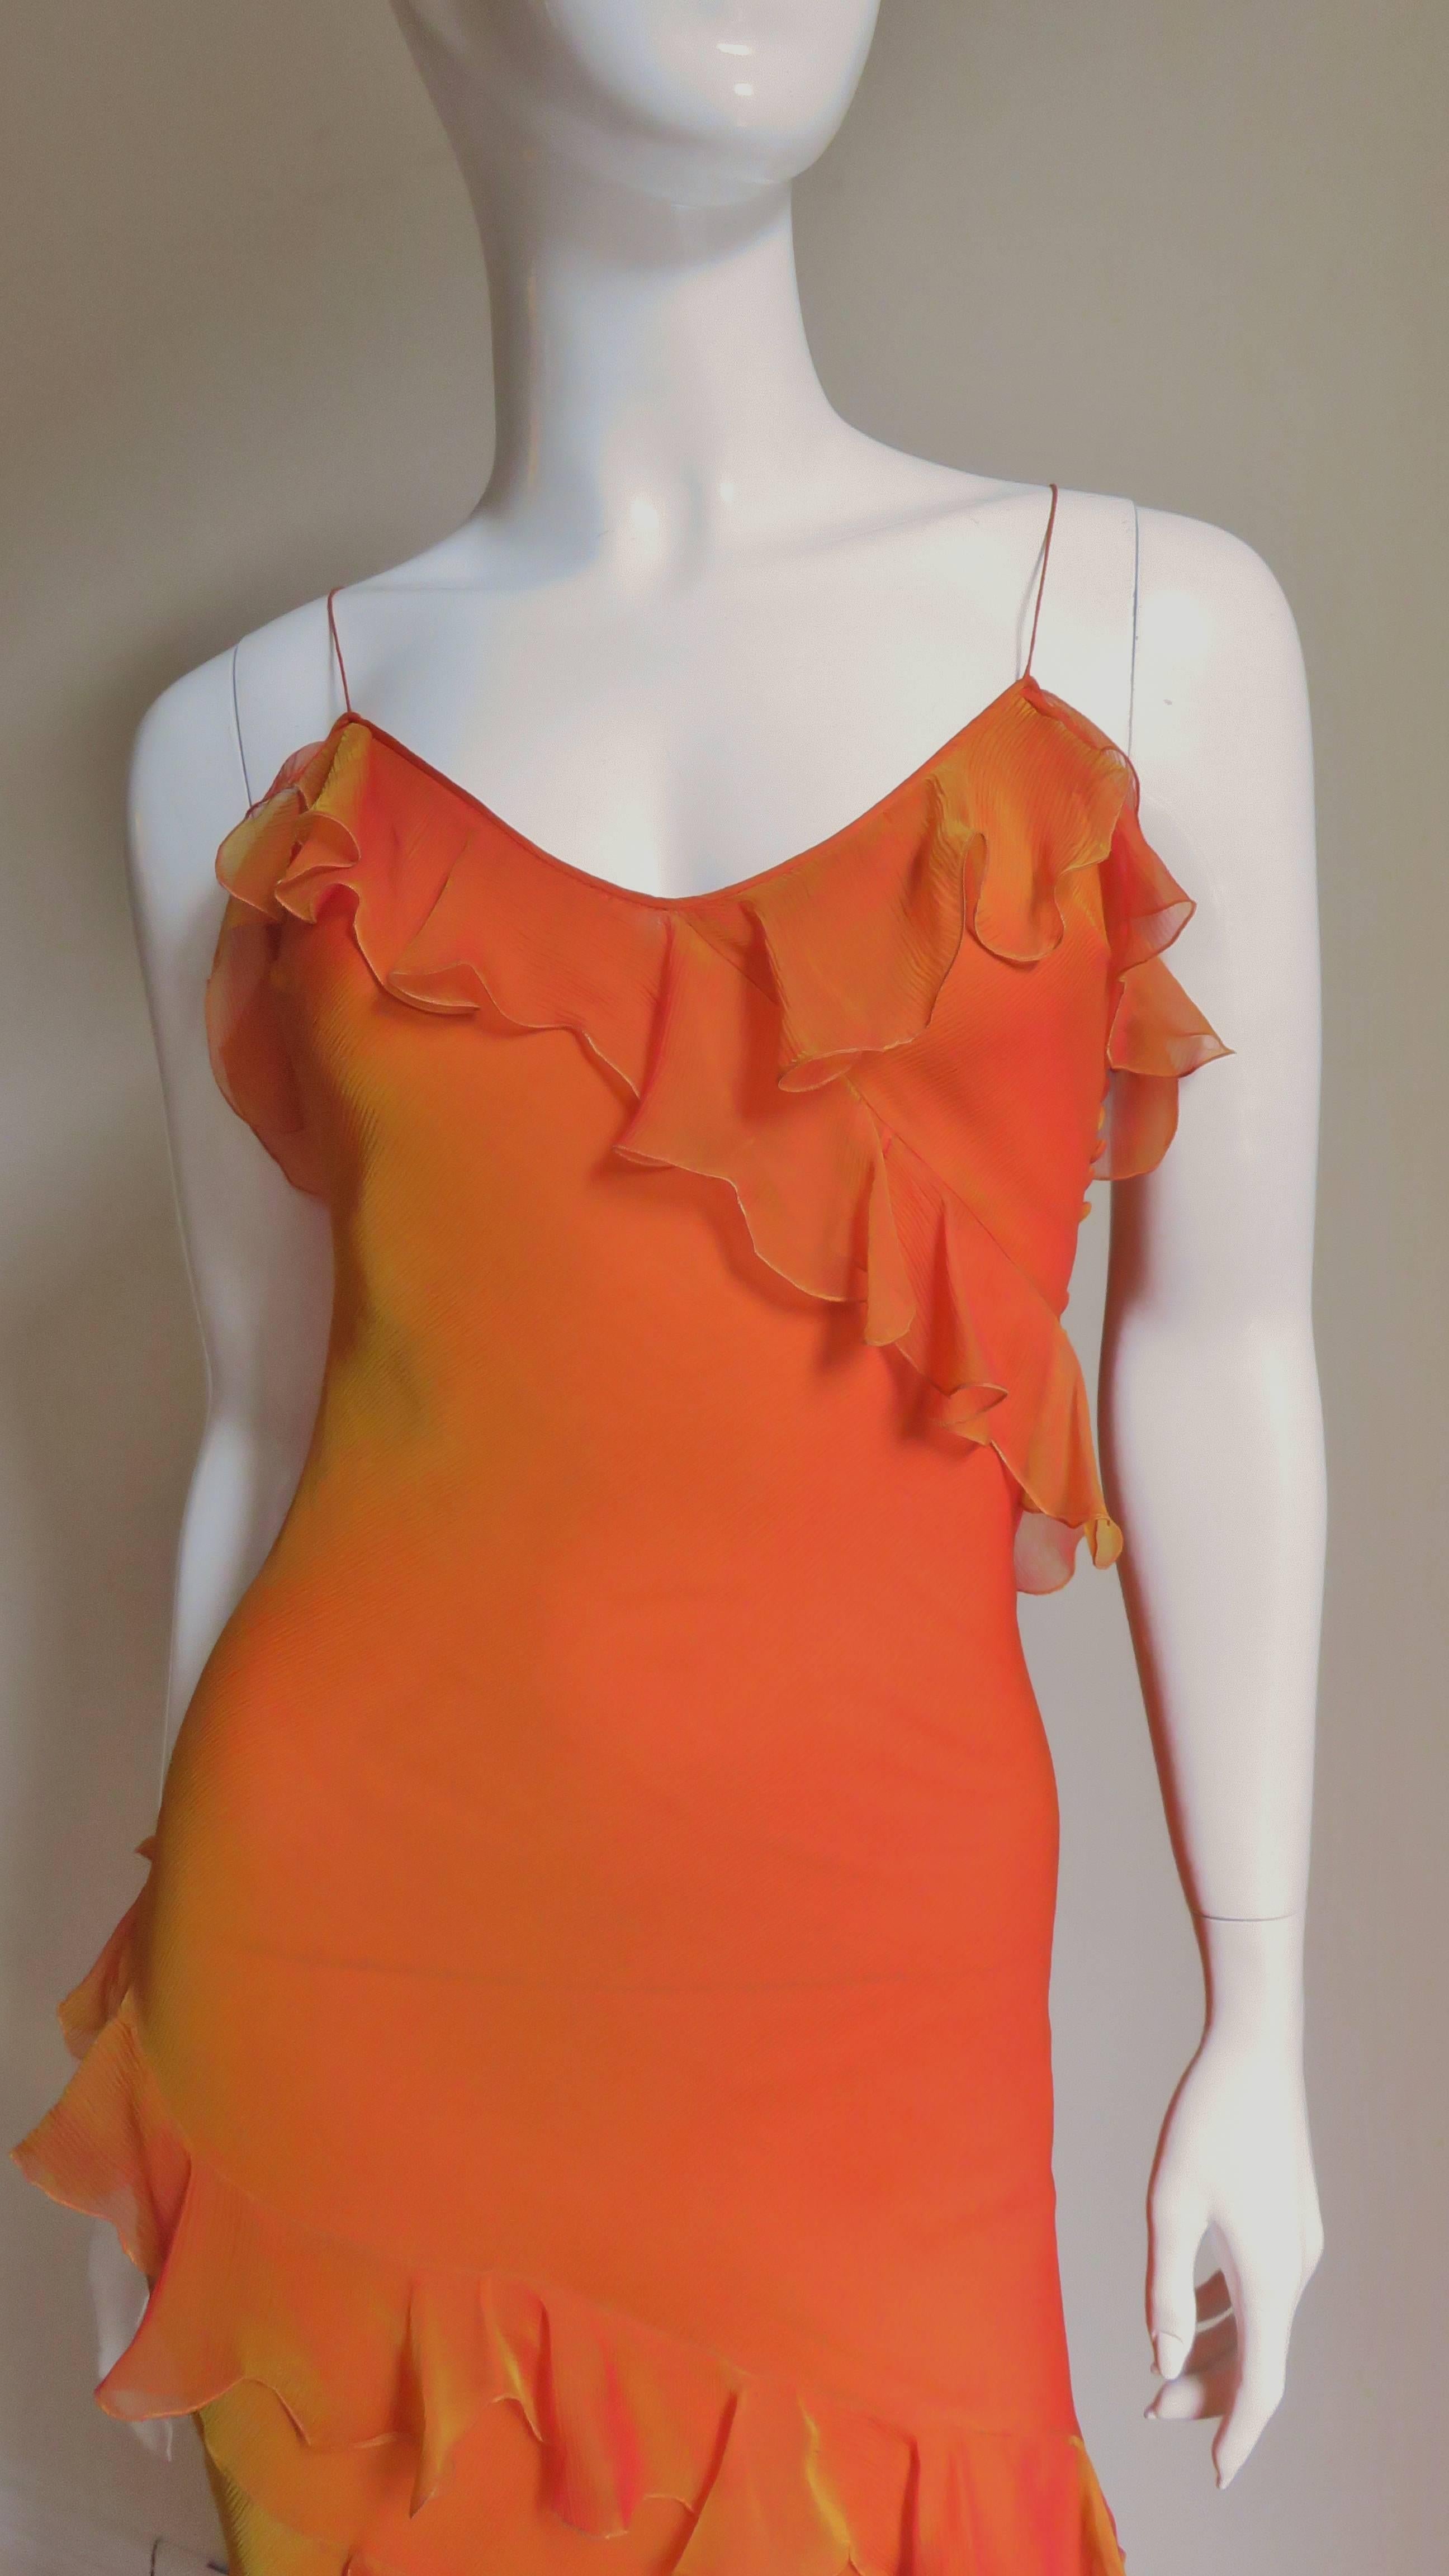 A gorgeous gown in a stunning shade of bright orange with a slight golden iridescence in the light.  It has spaghetti straps, is fitted through the thighs and is adorned with diagonal ruffles around the bodice and at the upper leg at angles.  It has